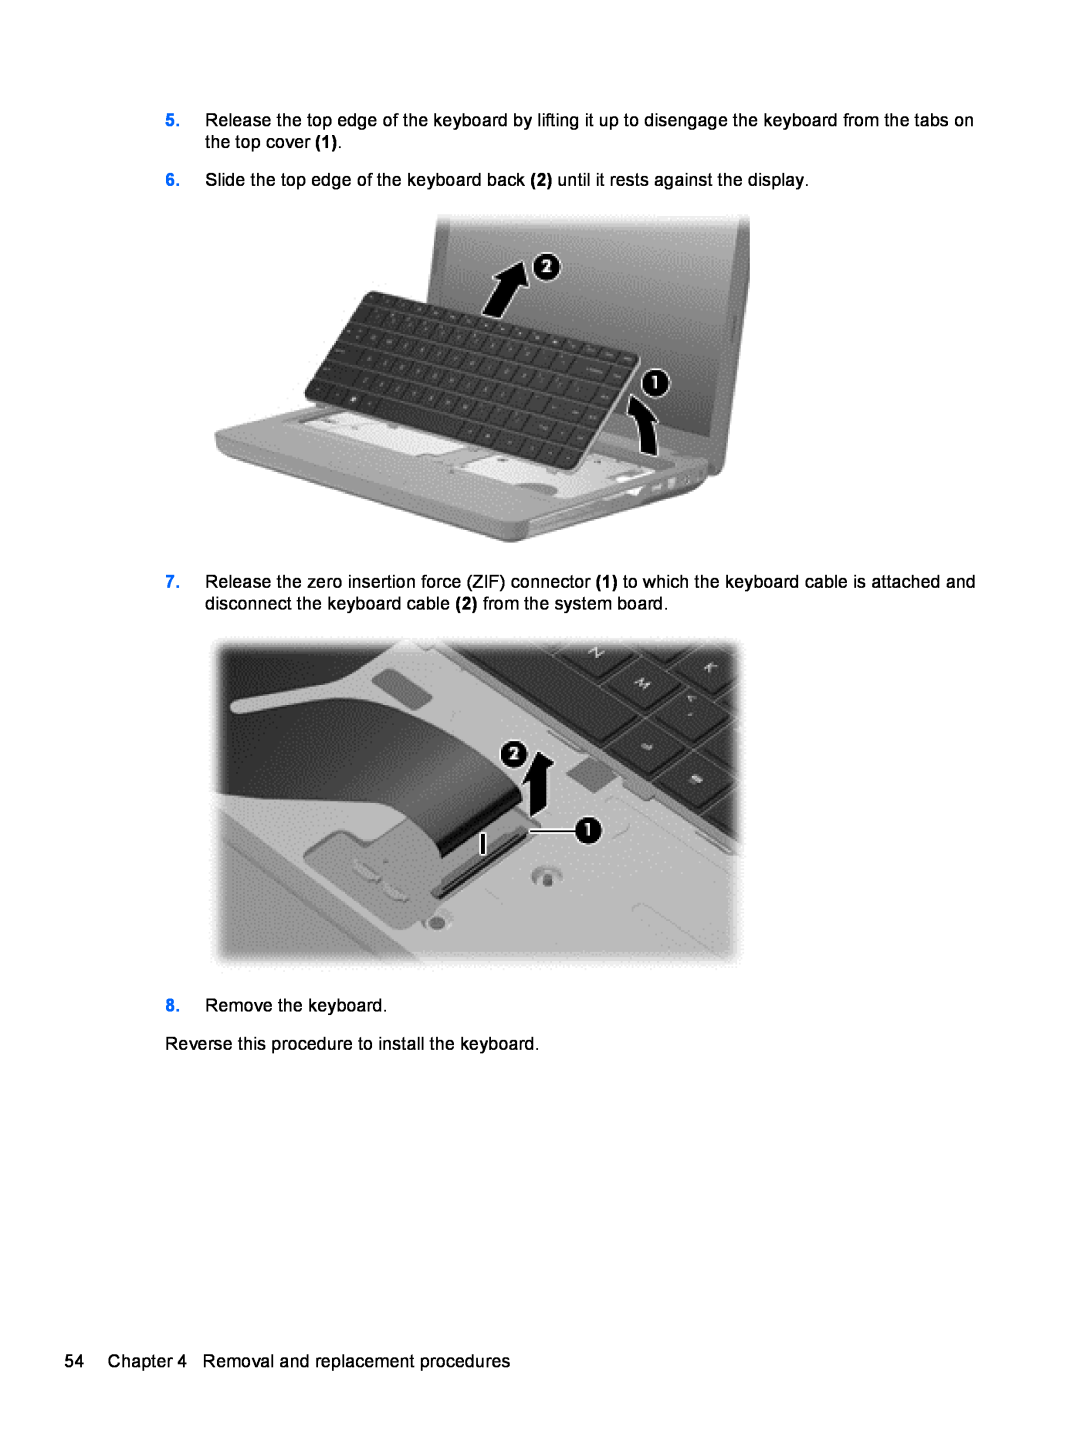 Compaq CQ42 manual Remove the keyboard Reverse this procedure to install the keyboard, Removal and replacement procedures 